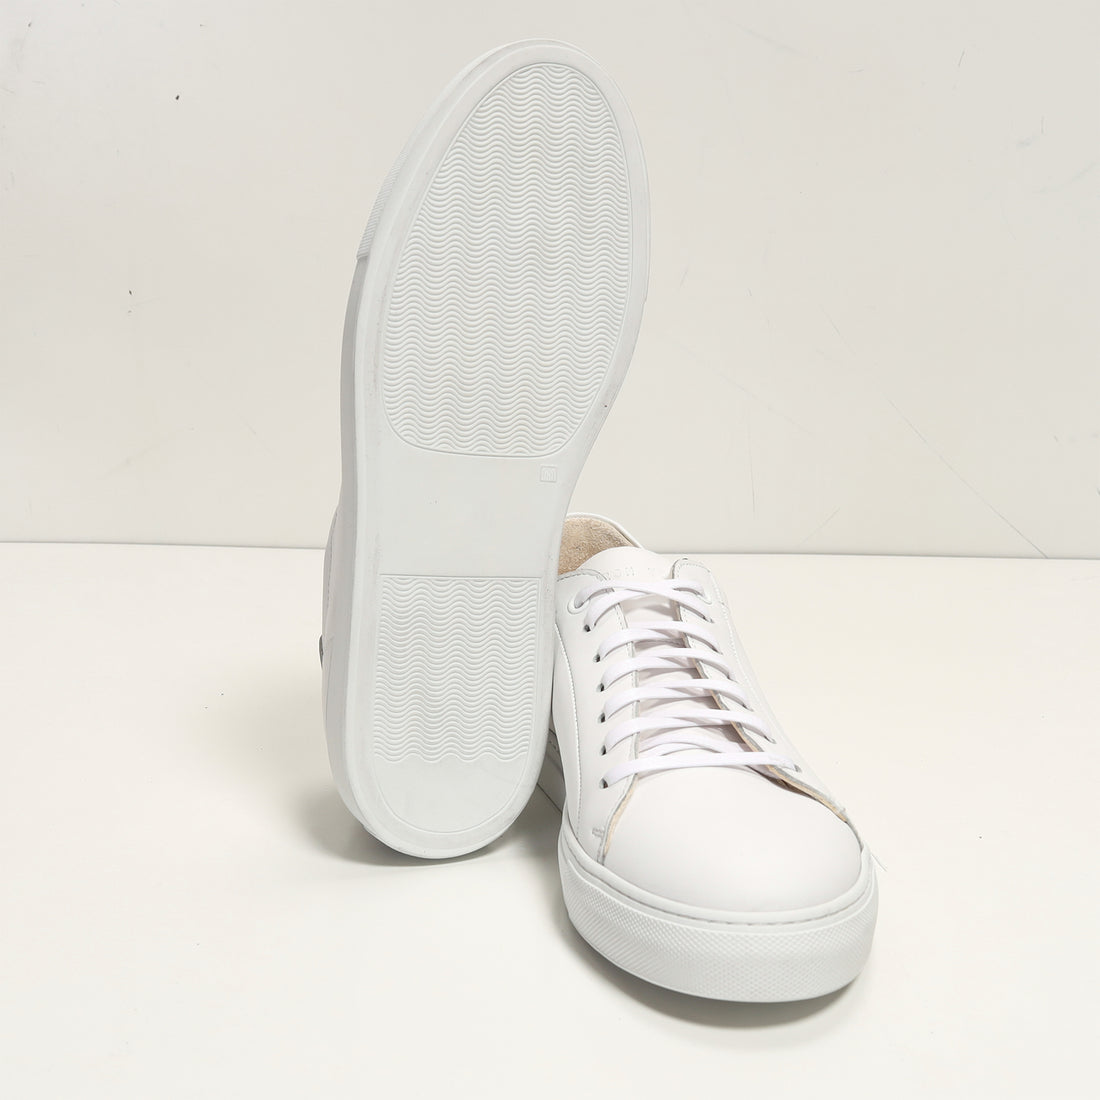 Court Sneakers - WEISS